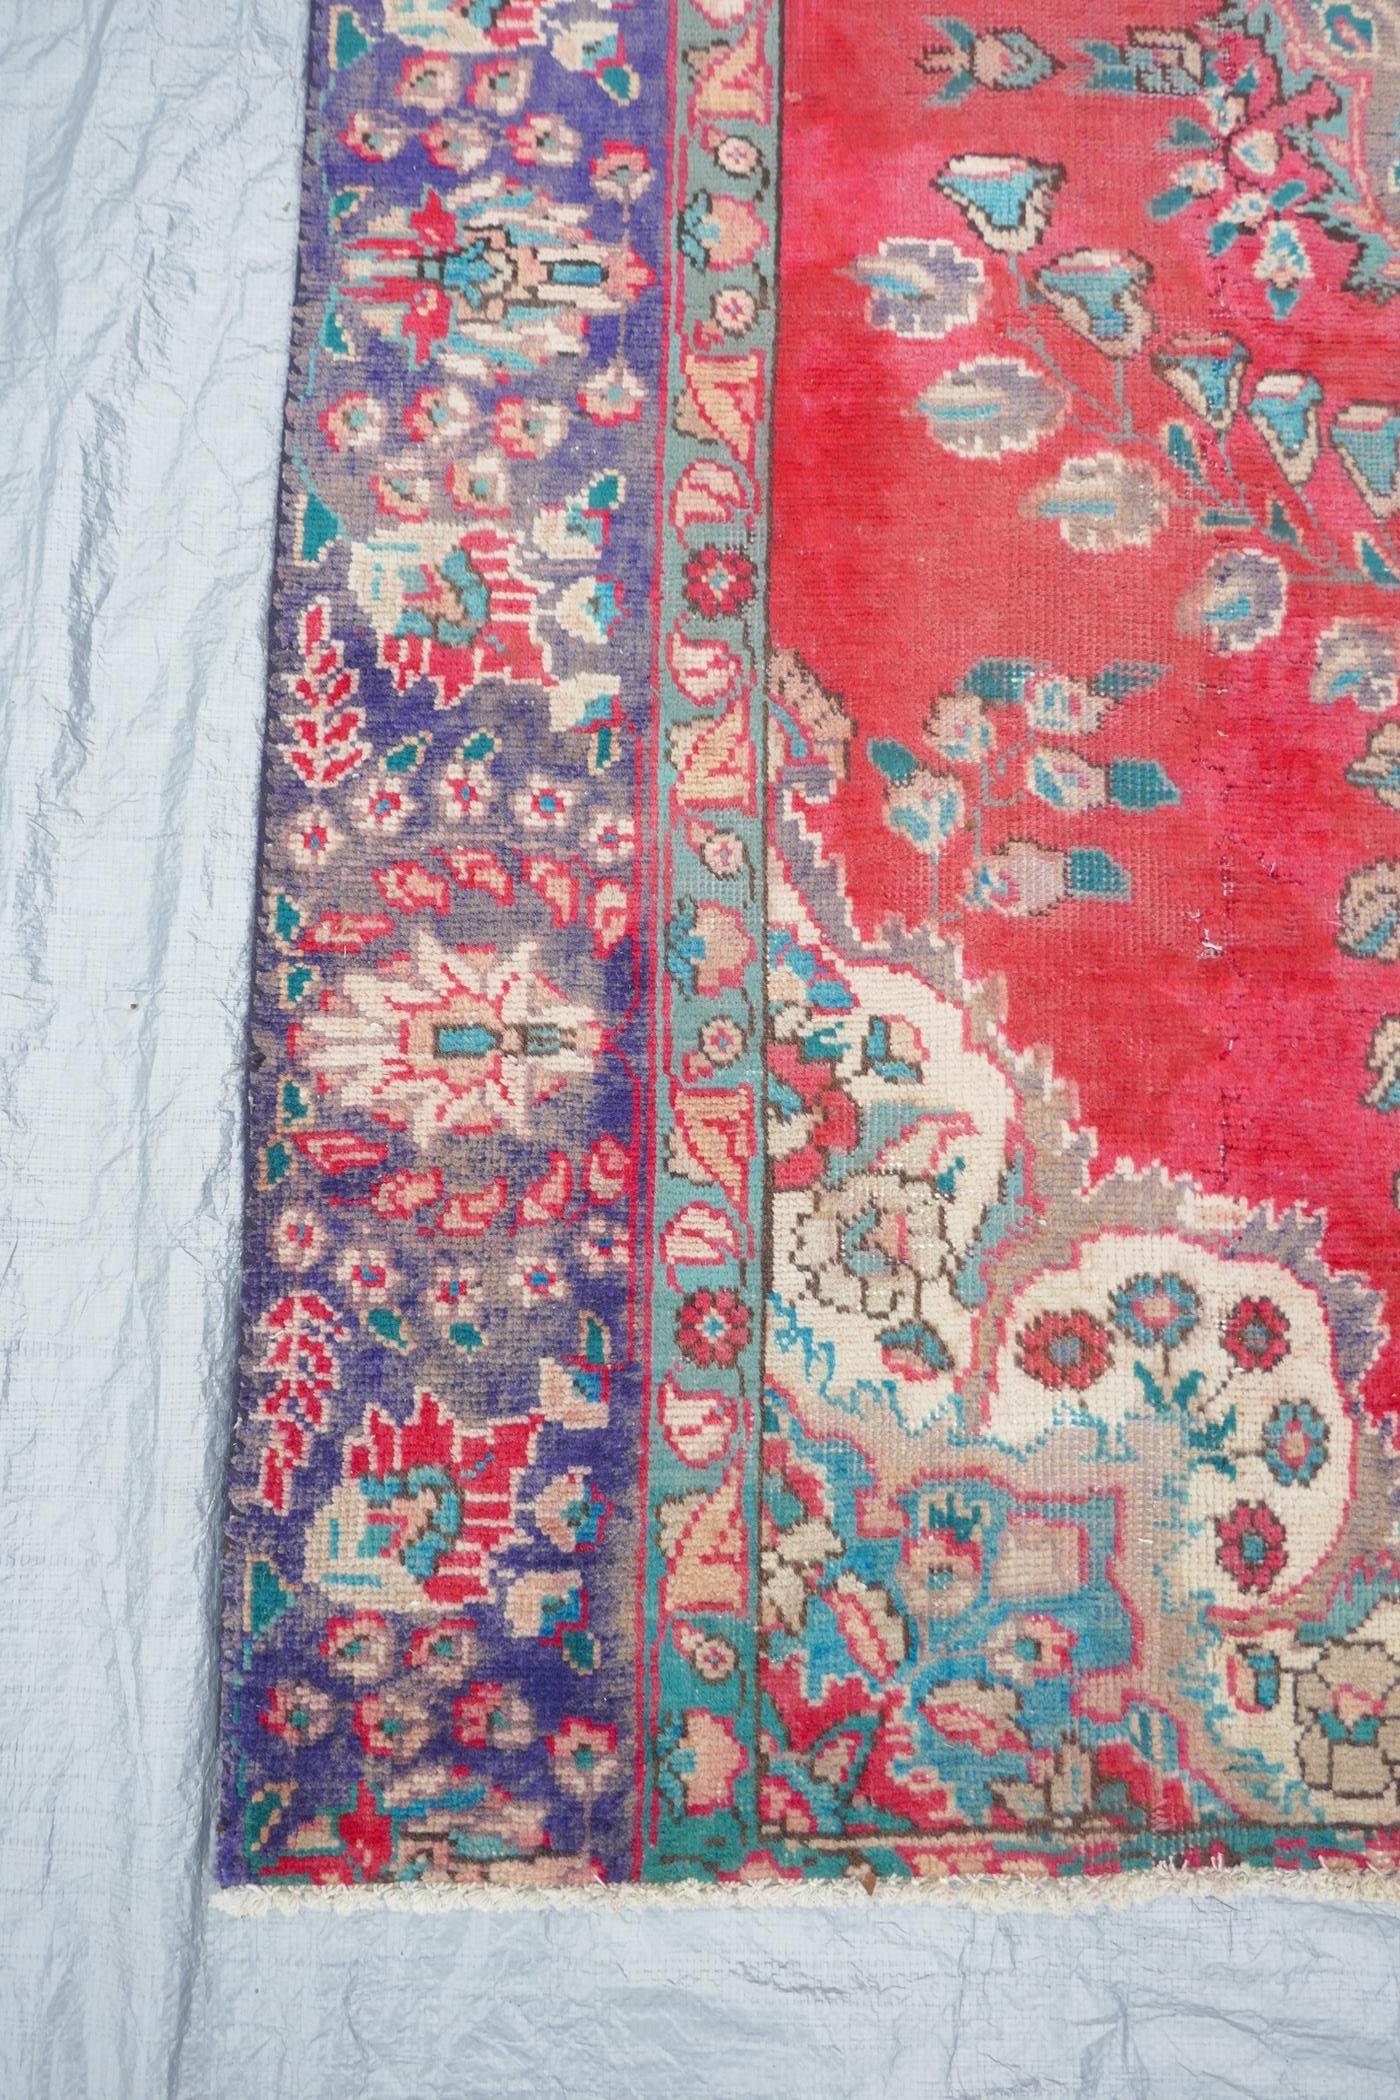 A vintage Iranian carpet from the Tabriz region, with a floral medallion design on a red field - Image 3 of 5